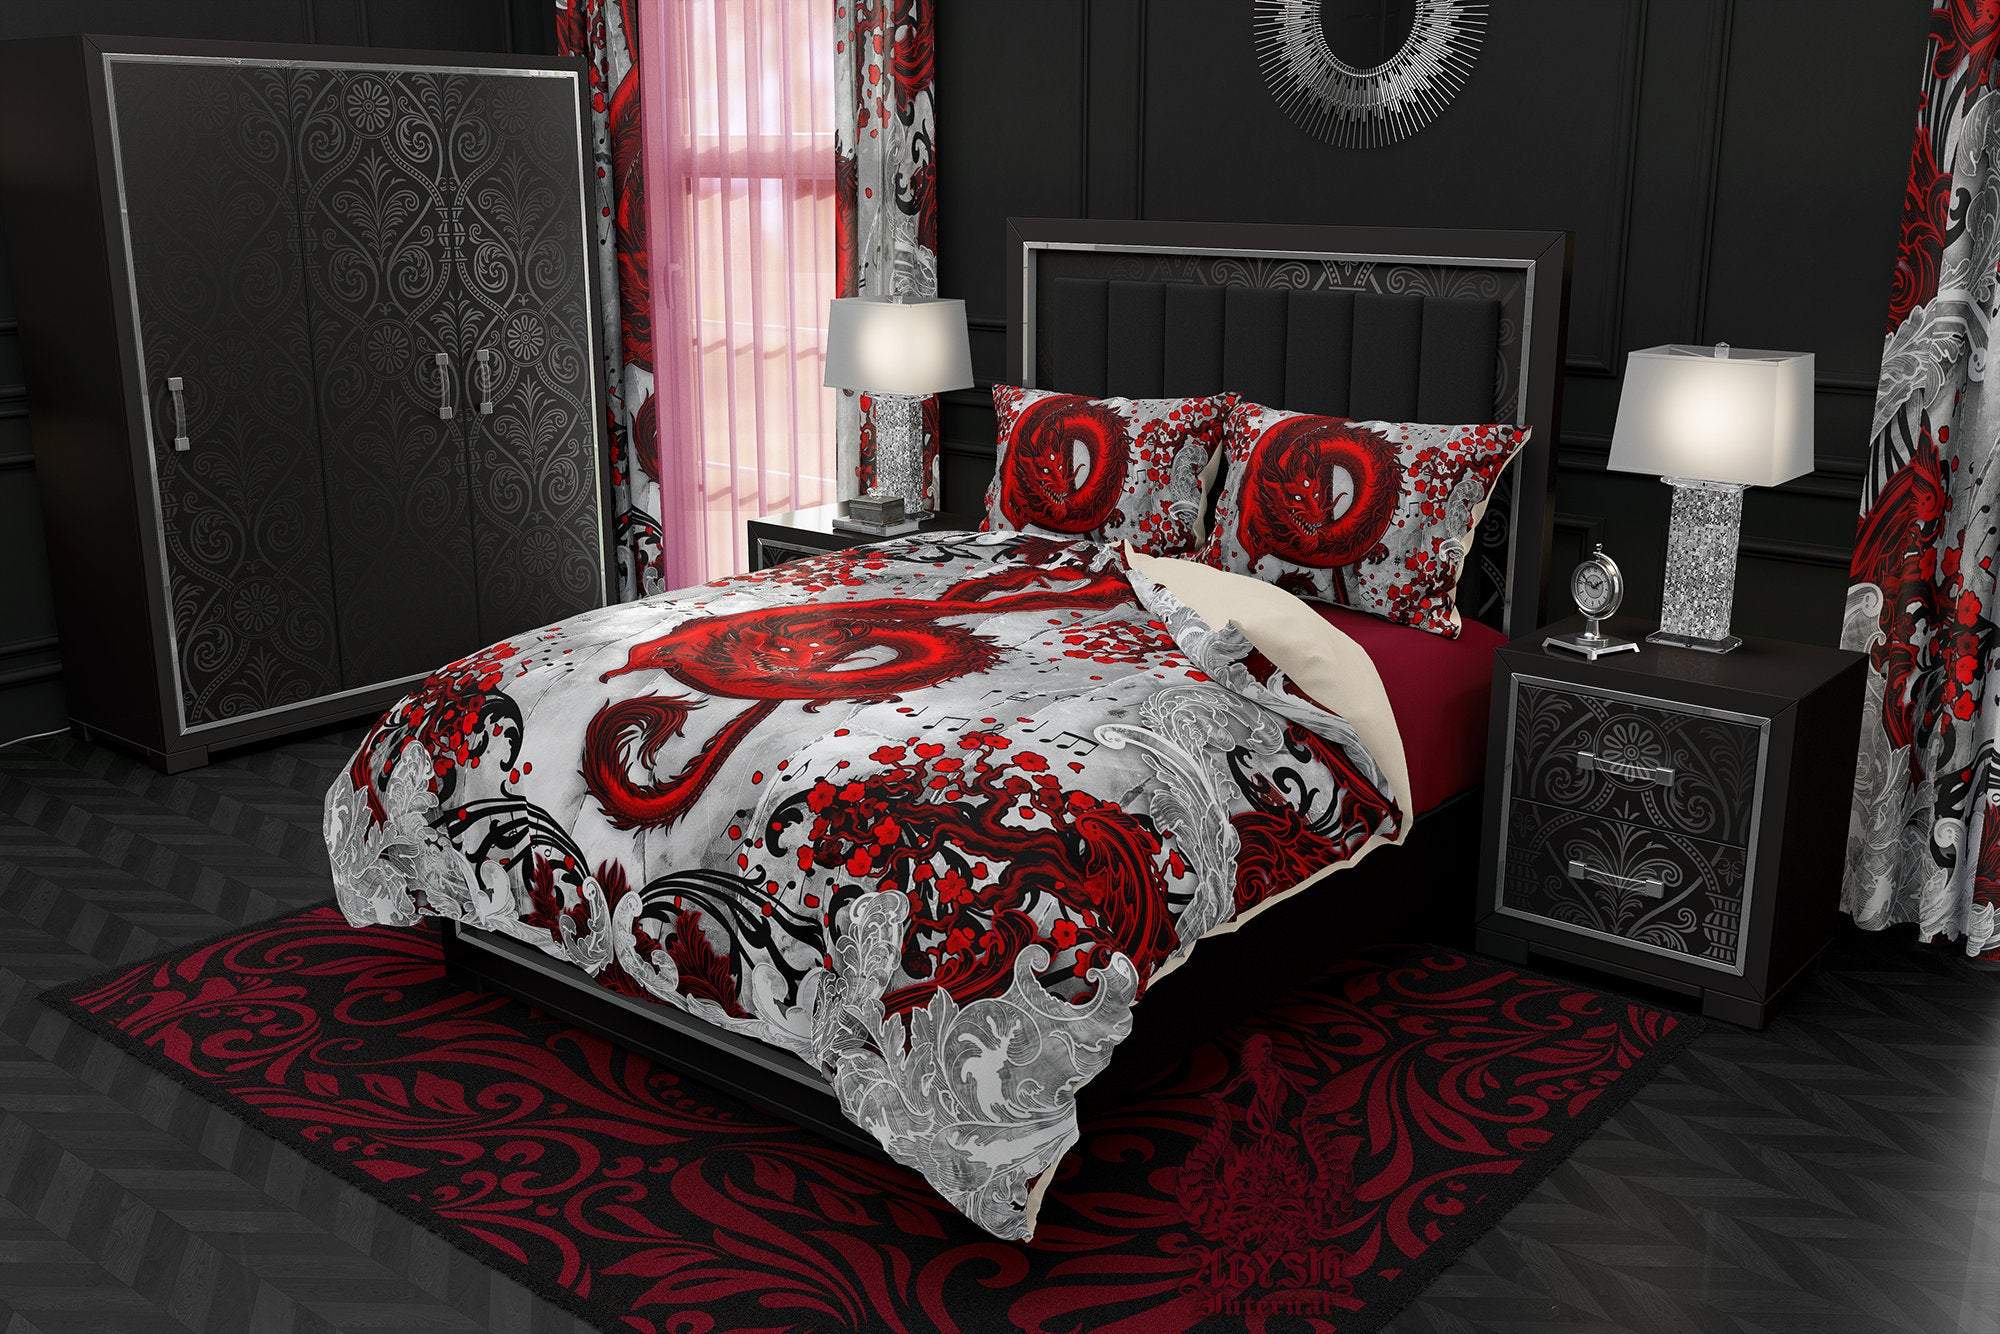 Red Dragon Bedding Set, Comforter and Duvet, Bloody White Goth Bed Cover and Bedroom Decor, King, Queen and Twin Size - Music Art - Abysm Internal